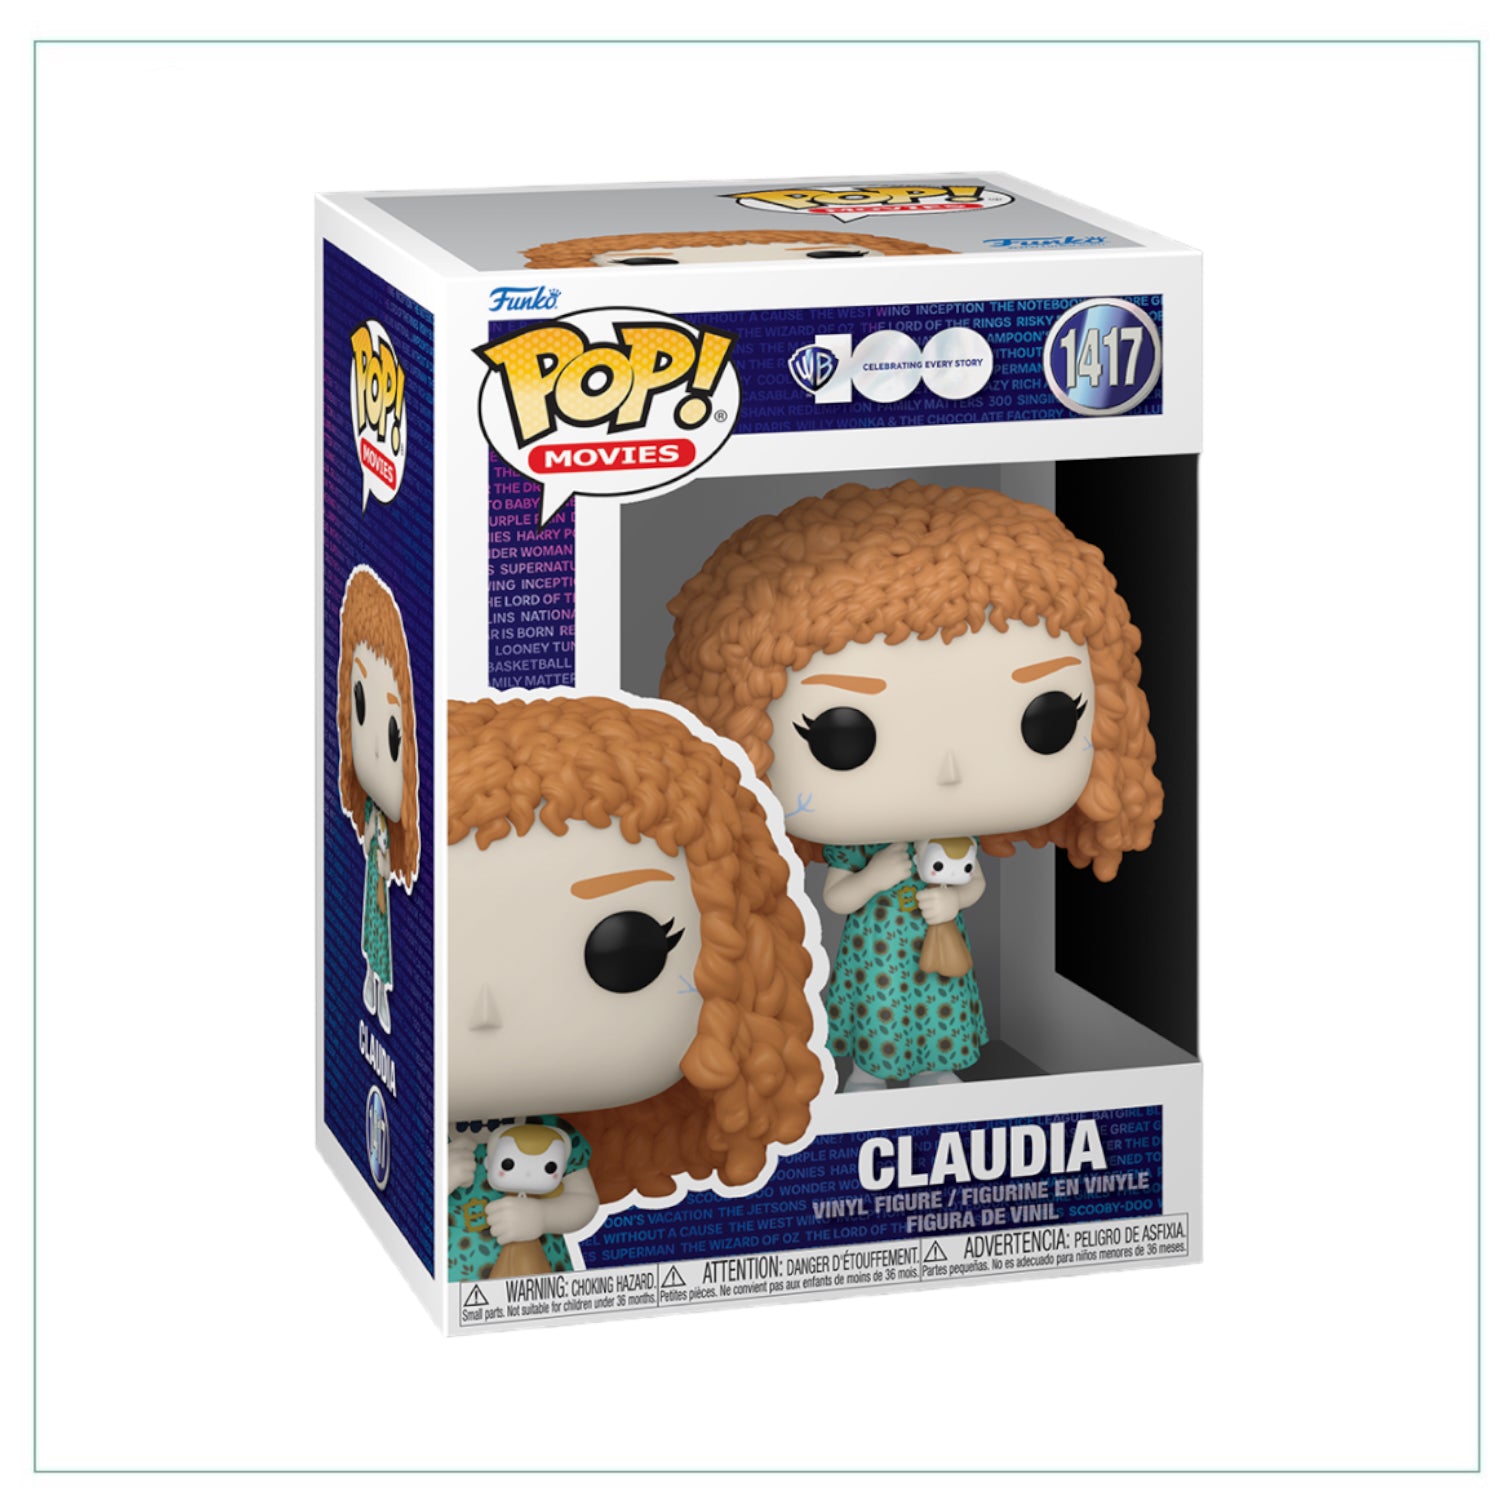 Claudia #1417 Funko Pop! Interview With a Vampire